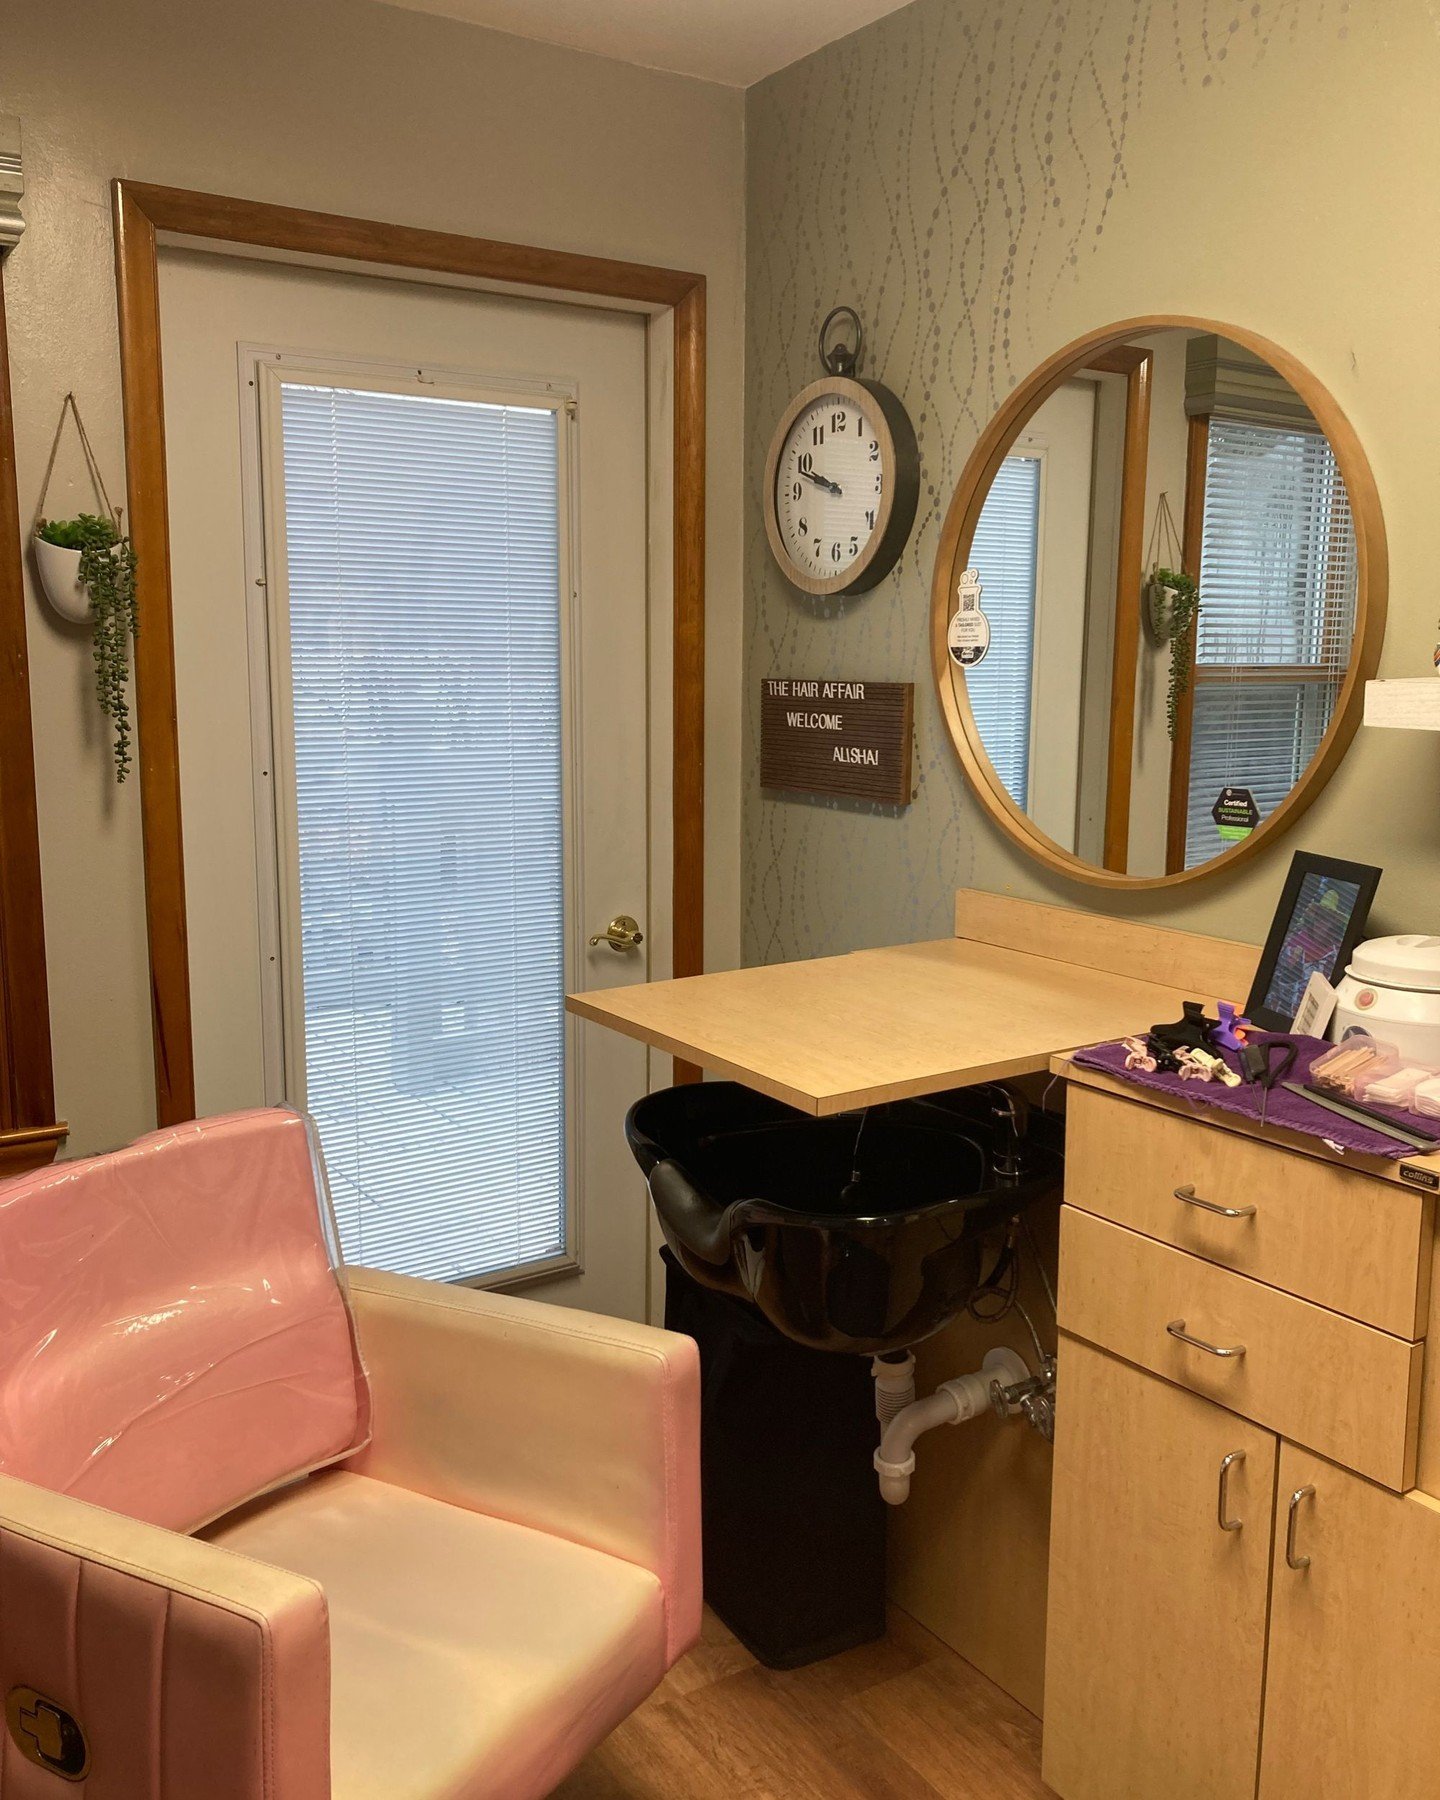 Oops, it's been a hot minute since I gave you a sneak peek into my world at the salon!

One of the best parts about being here is the calming environment and the option to customize your time at the salon. 

Want a closer look? Drop a &quot;Yes&quot;